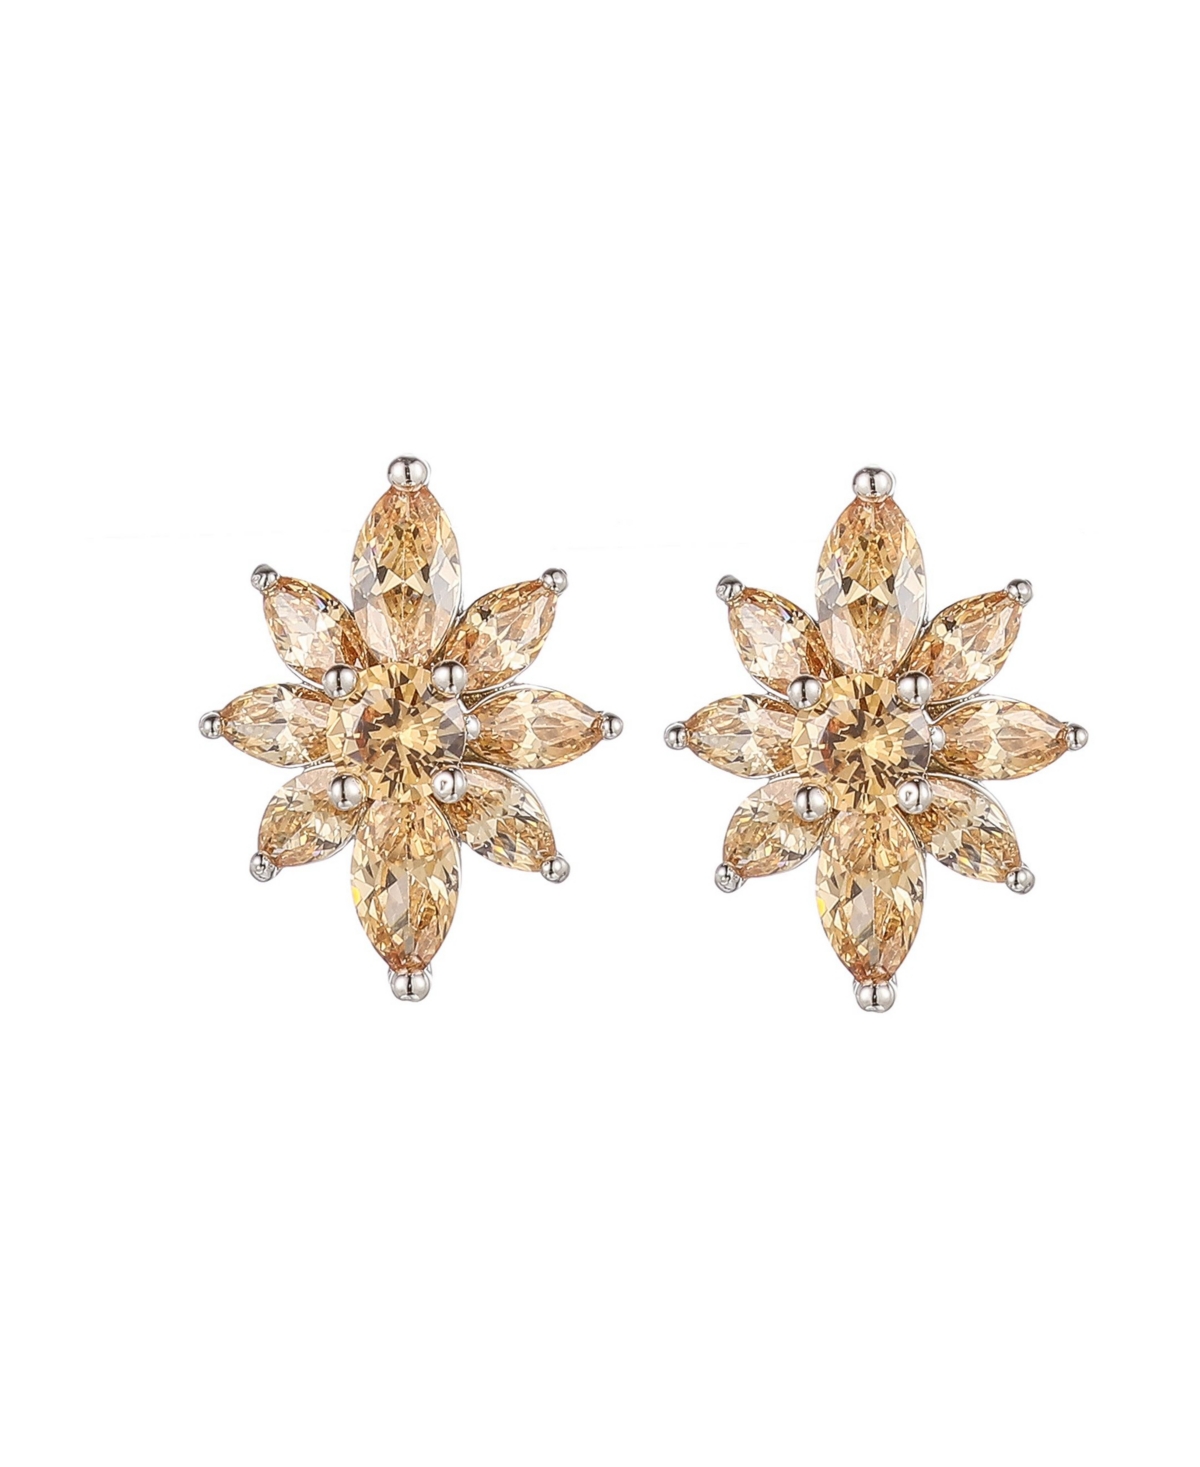 A & M Silver-Tone Champagne Flower Cluster Earrings